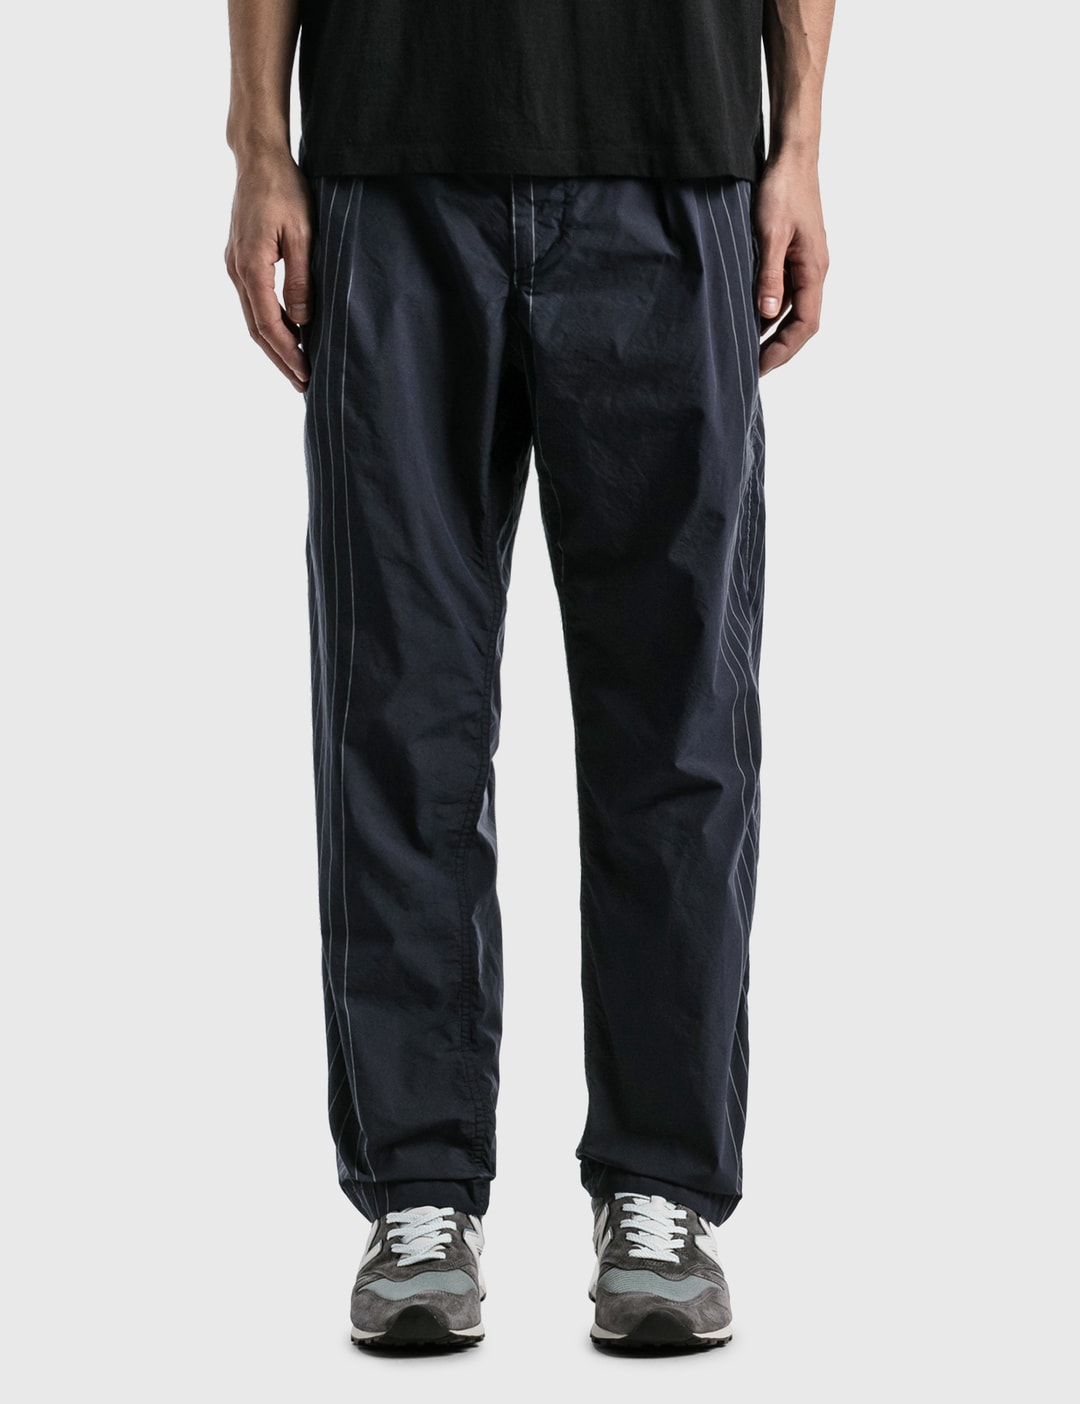 Engineered Garments - Ground Pants | HBX - Globally Curated Fashion and ...